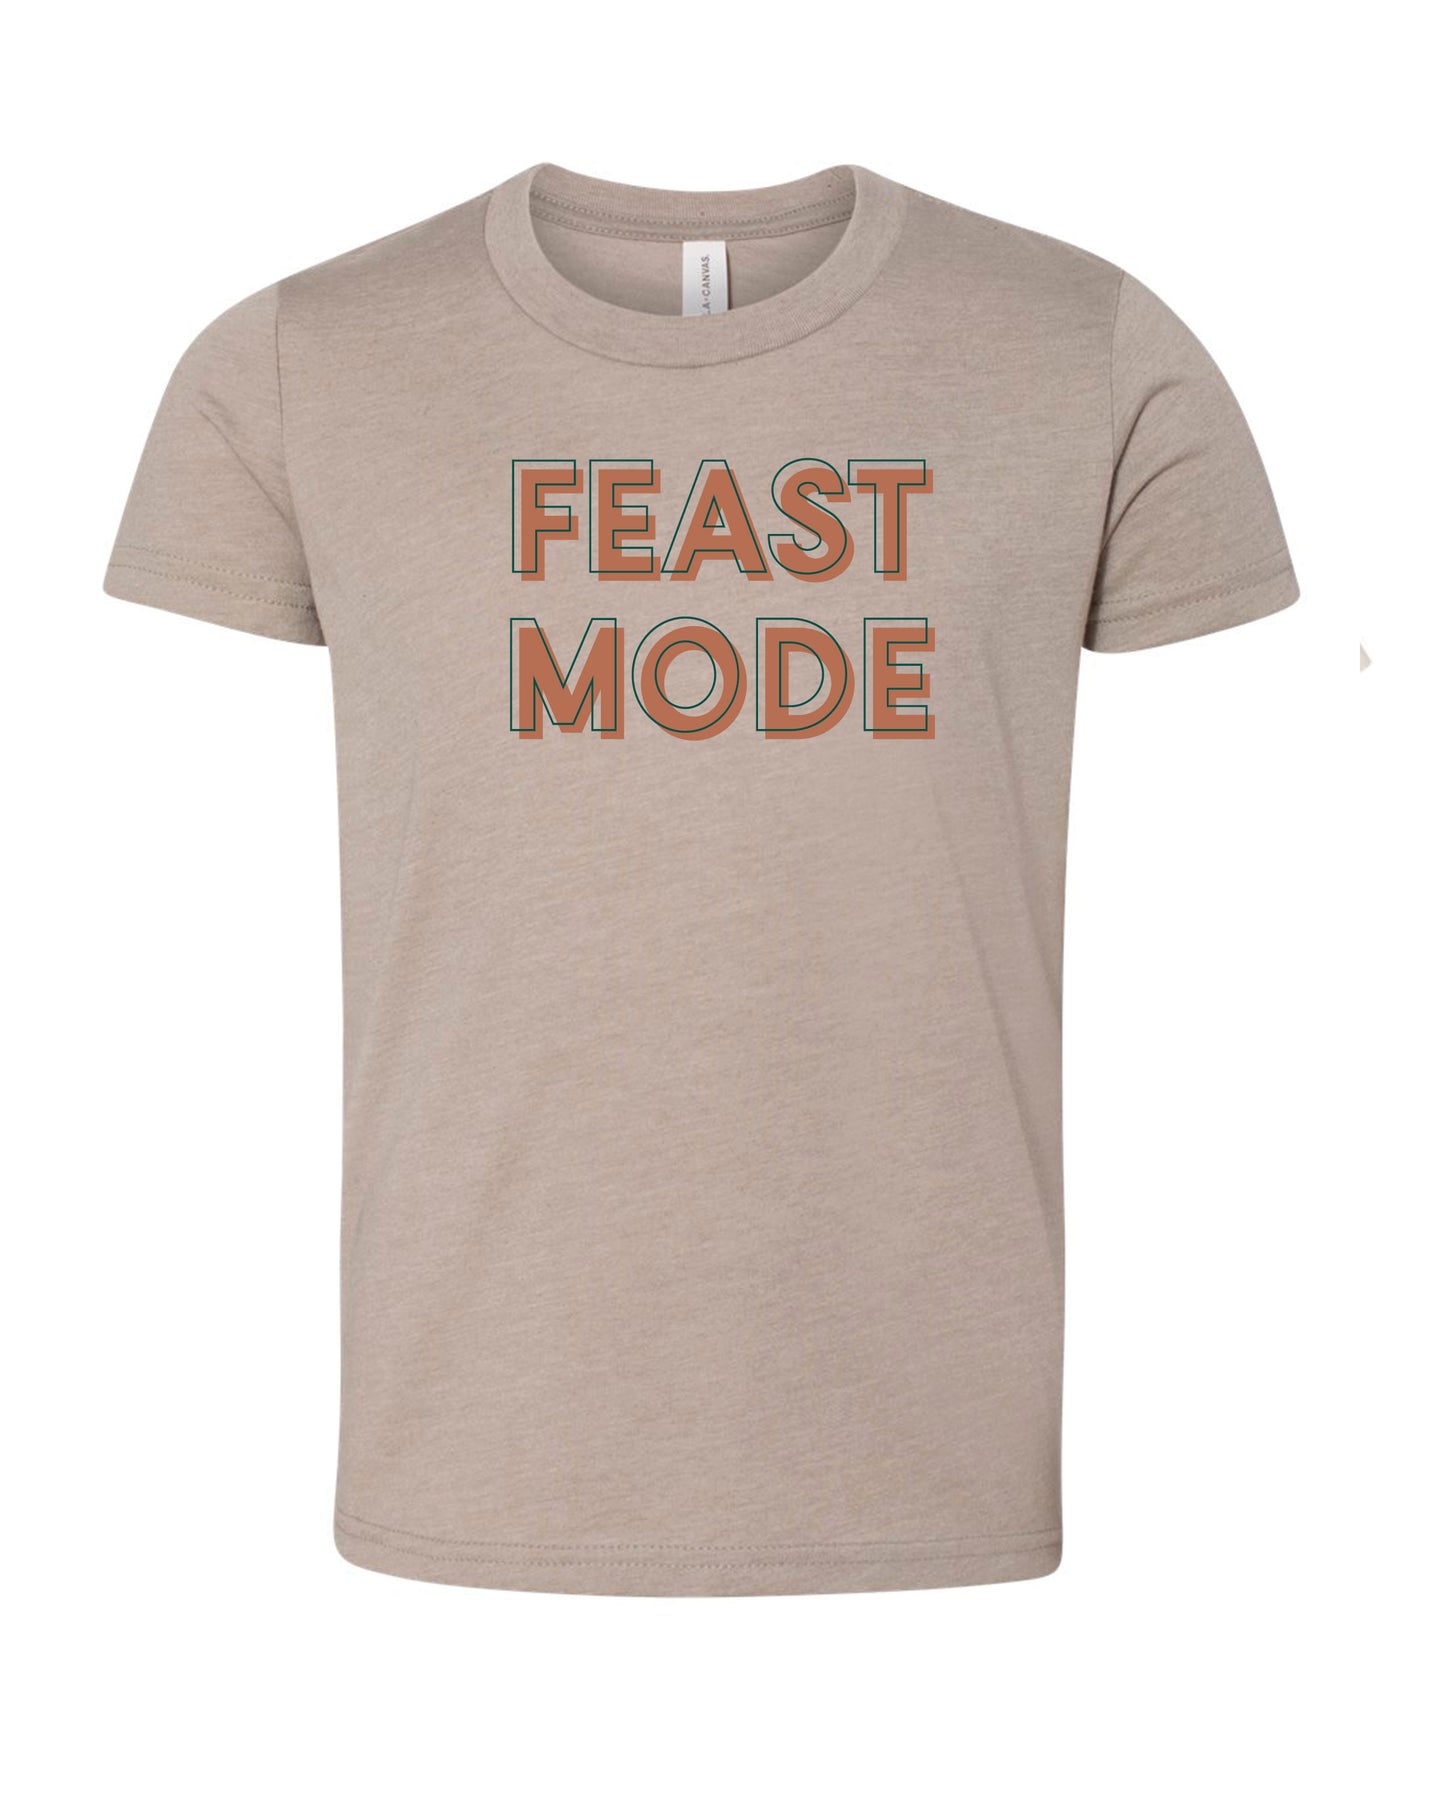 Feast Mode | Boys Long Sleeve Tee | RTS-Kids Tees-Sister Shirts-Sister Shirts, Cute & Custom Tees for Mama & Littles in Trussville, Alabama.